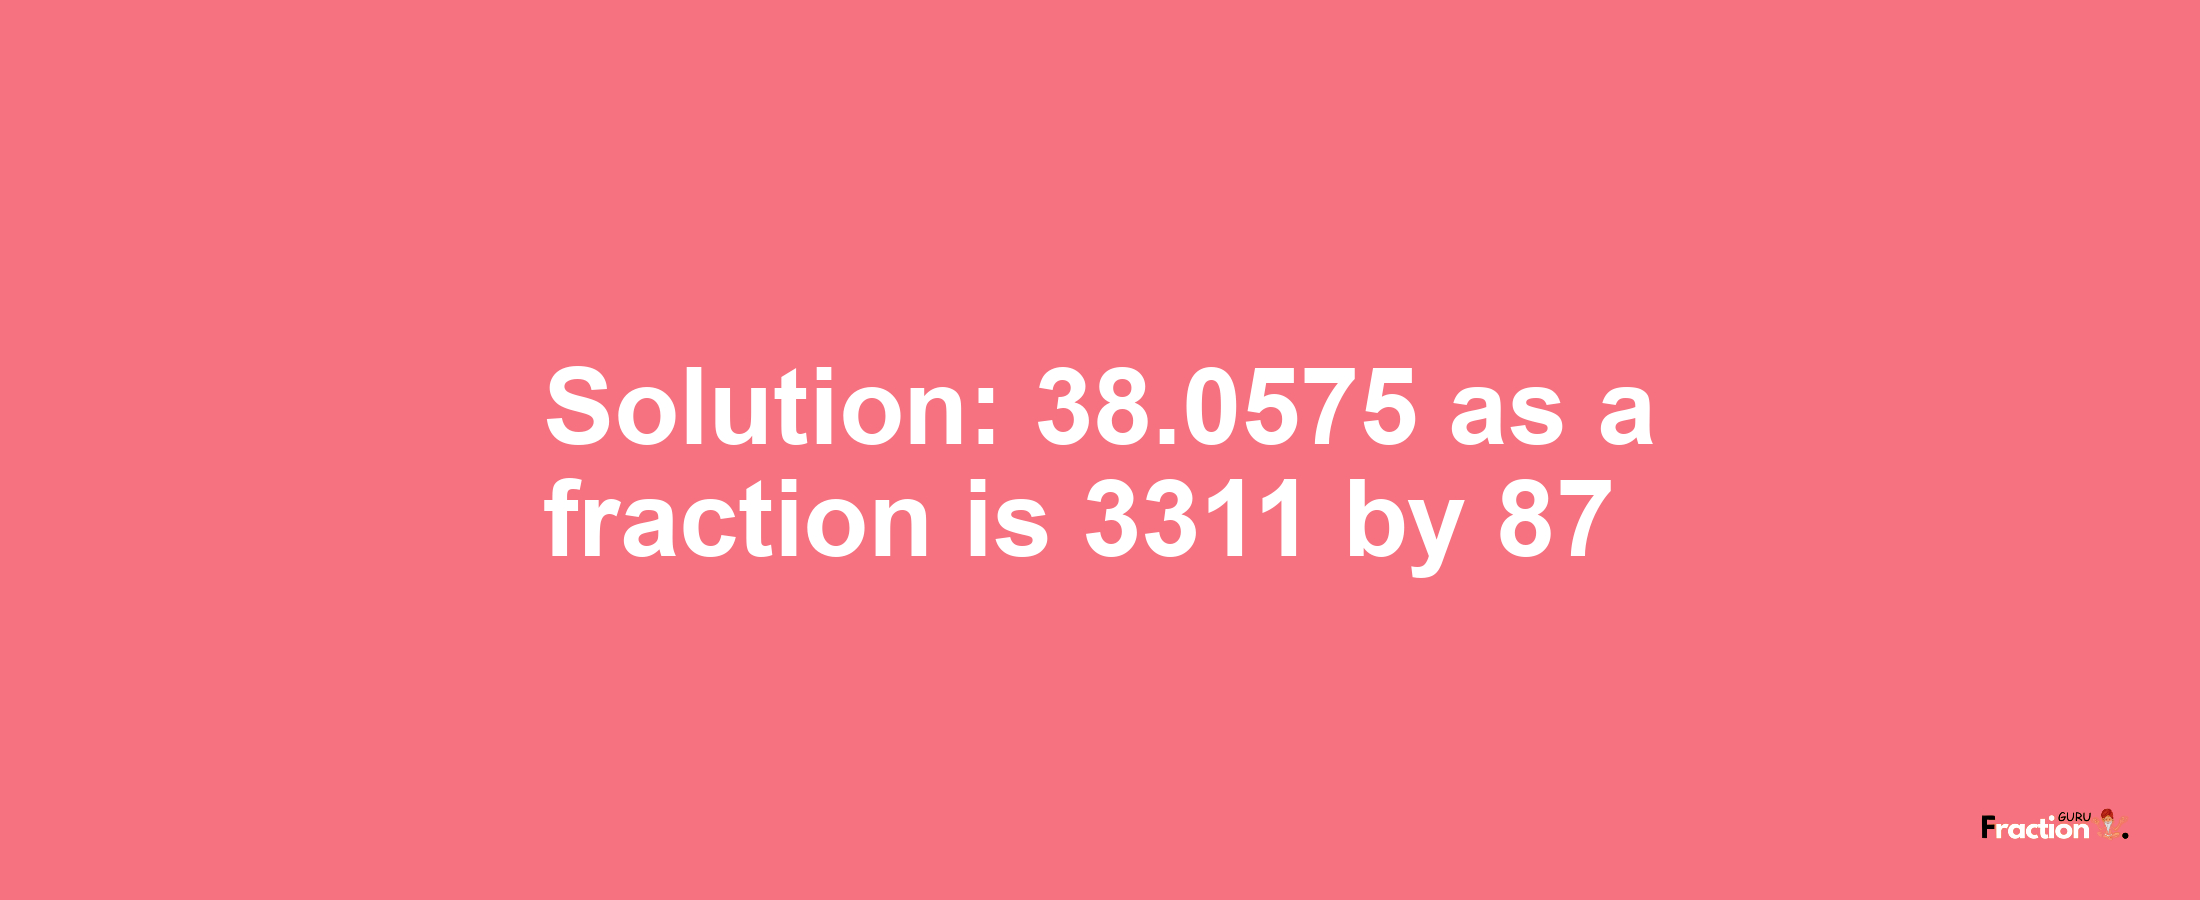 Solution:38.0575 as a fraction is 3311/87